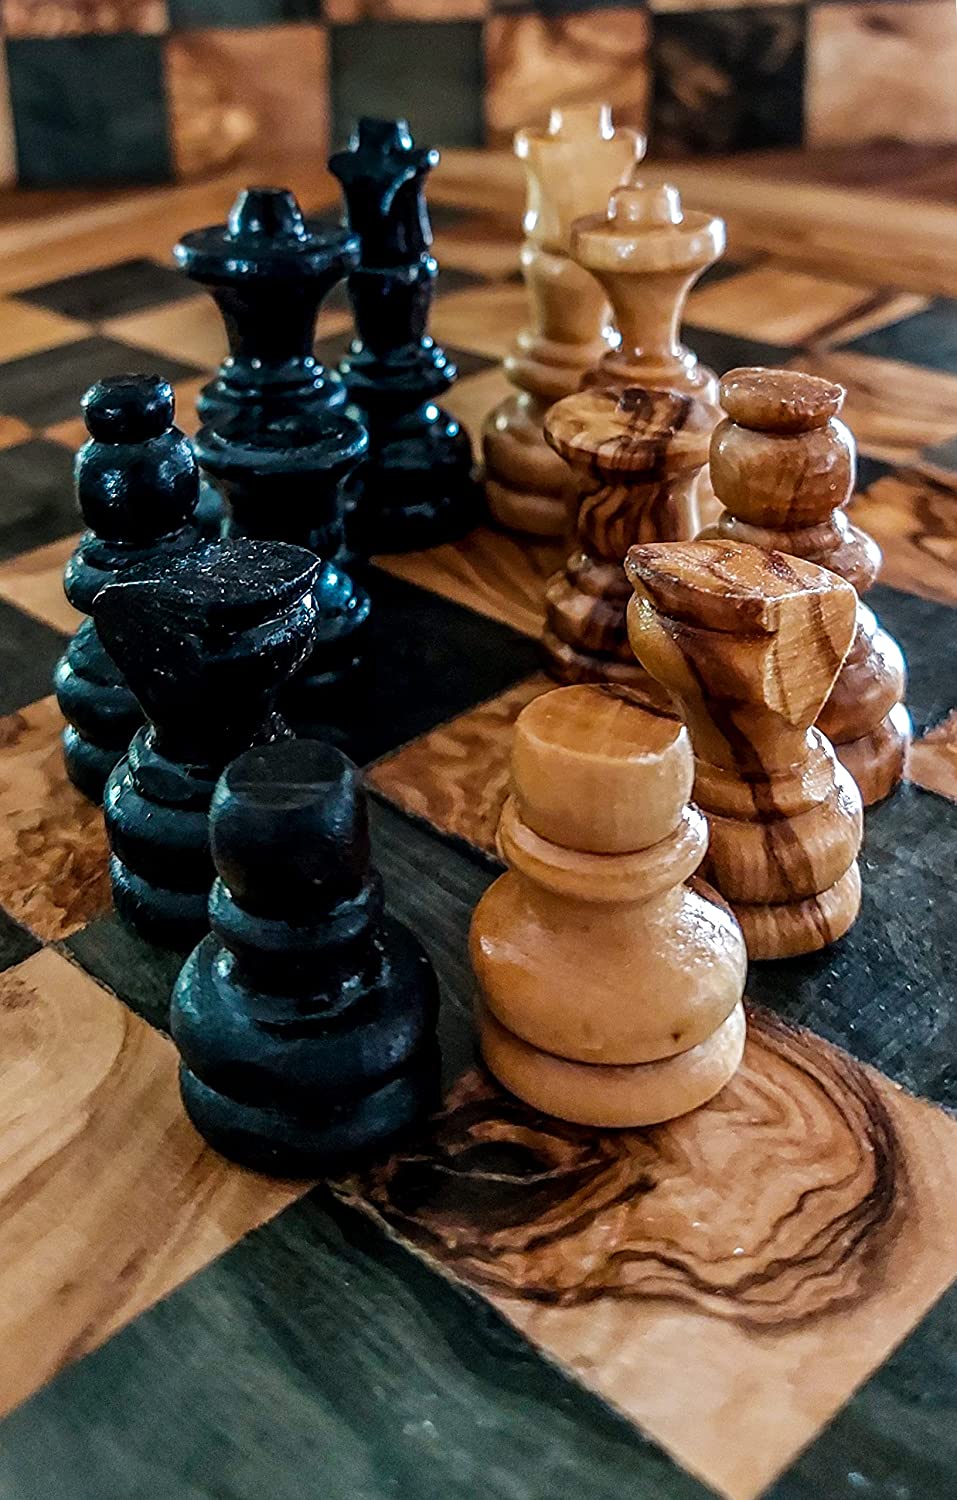 Zerazi - Olive Wood Chess Set - 30/30cm - Hand-carved Pieces, Storage Drawers, and Unique Design.